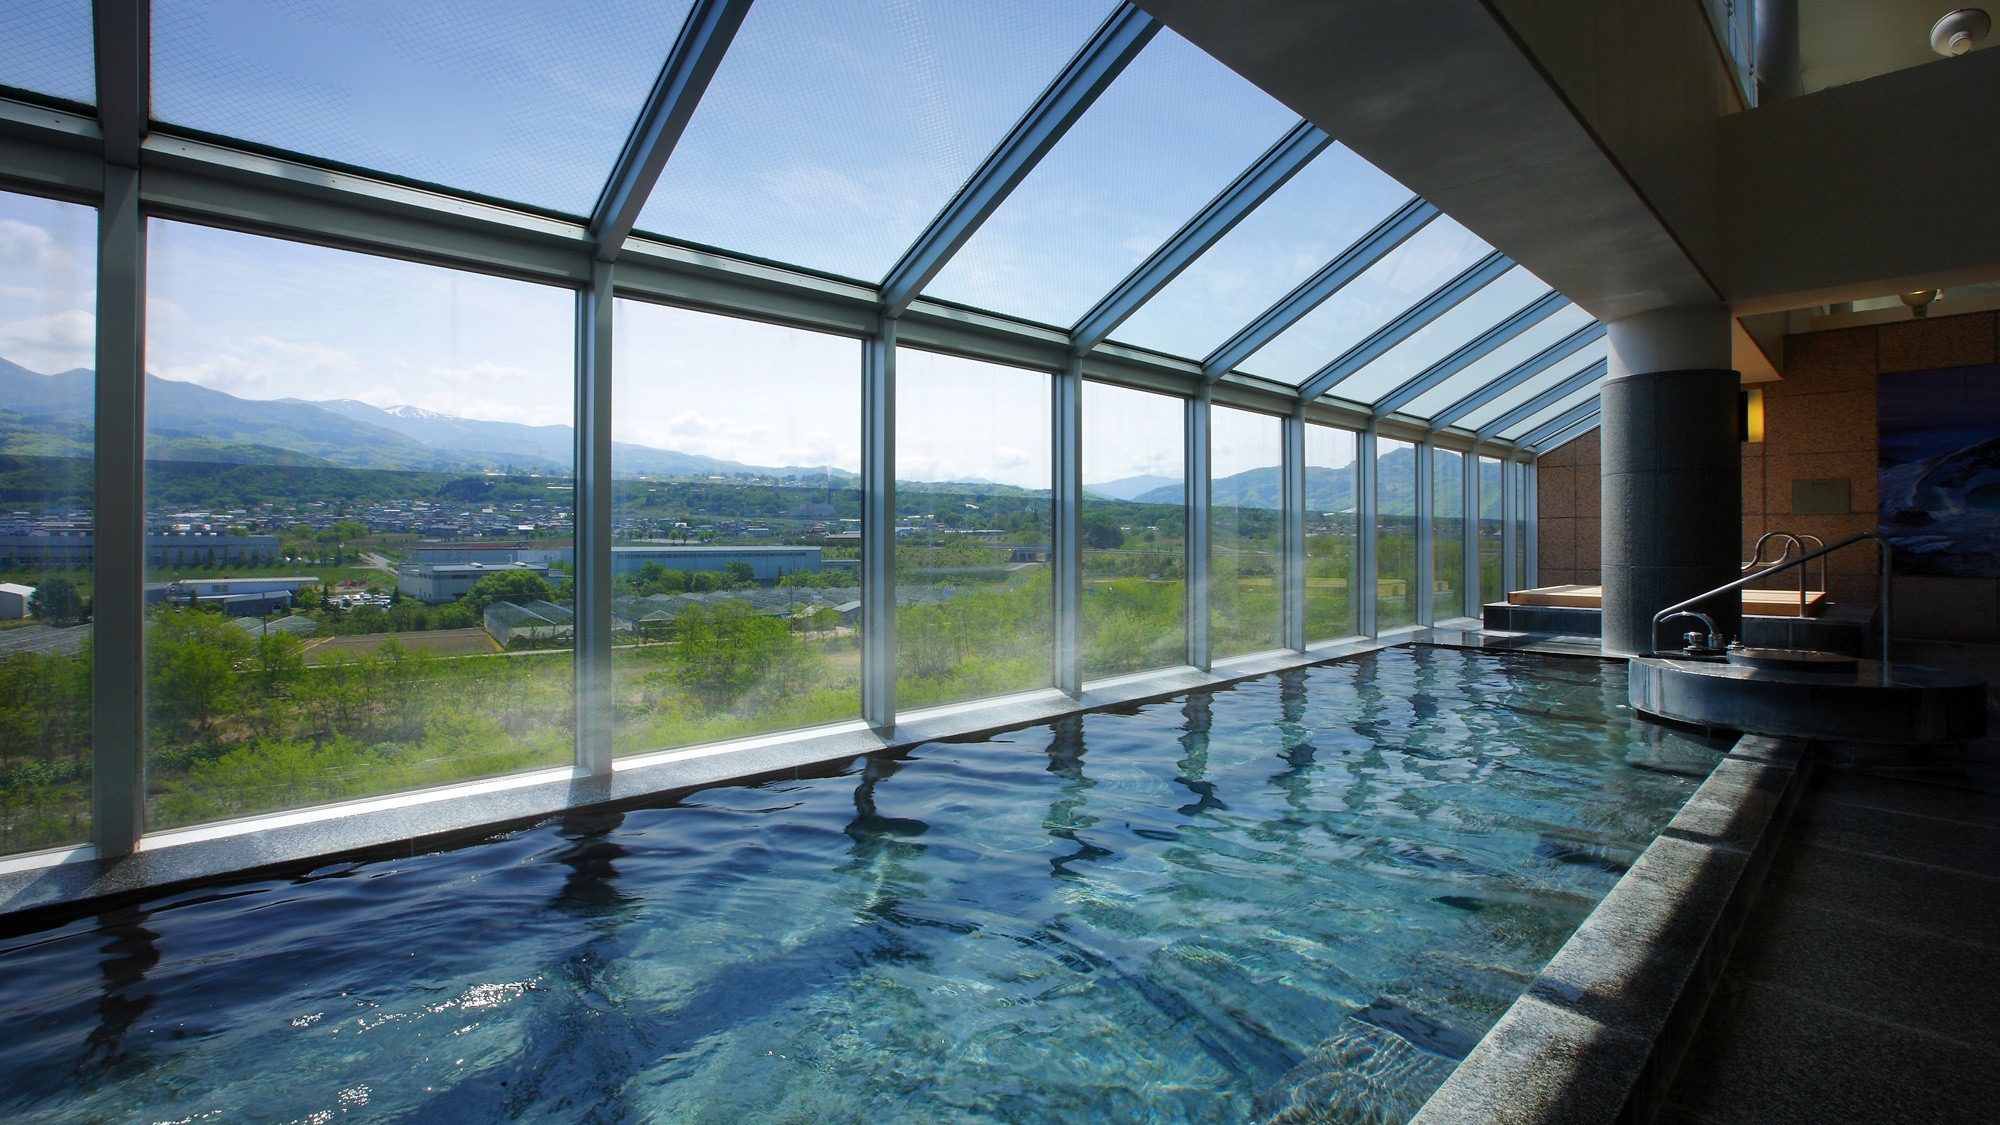 [Large communal bath] A spacious large communal bath on the top floor. You can see the magnificent view of the Zao Federation and Yamagata through the glass.